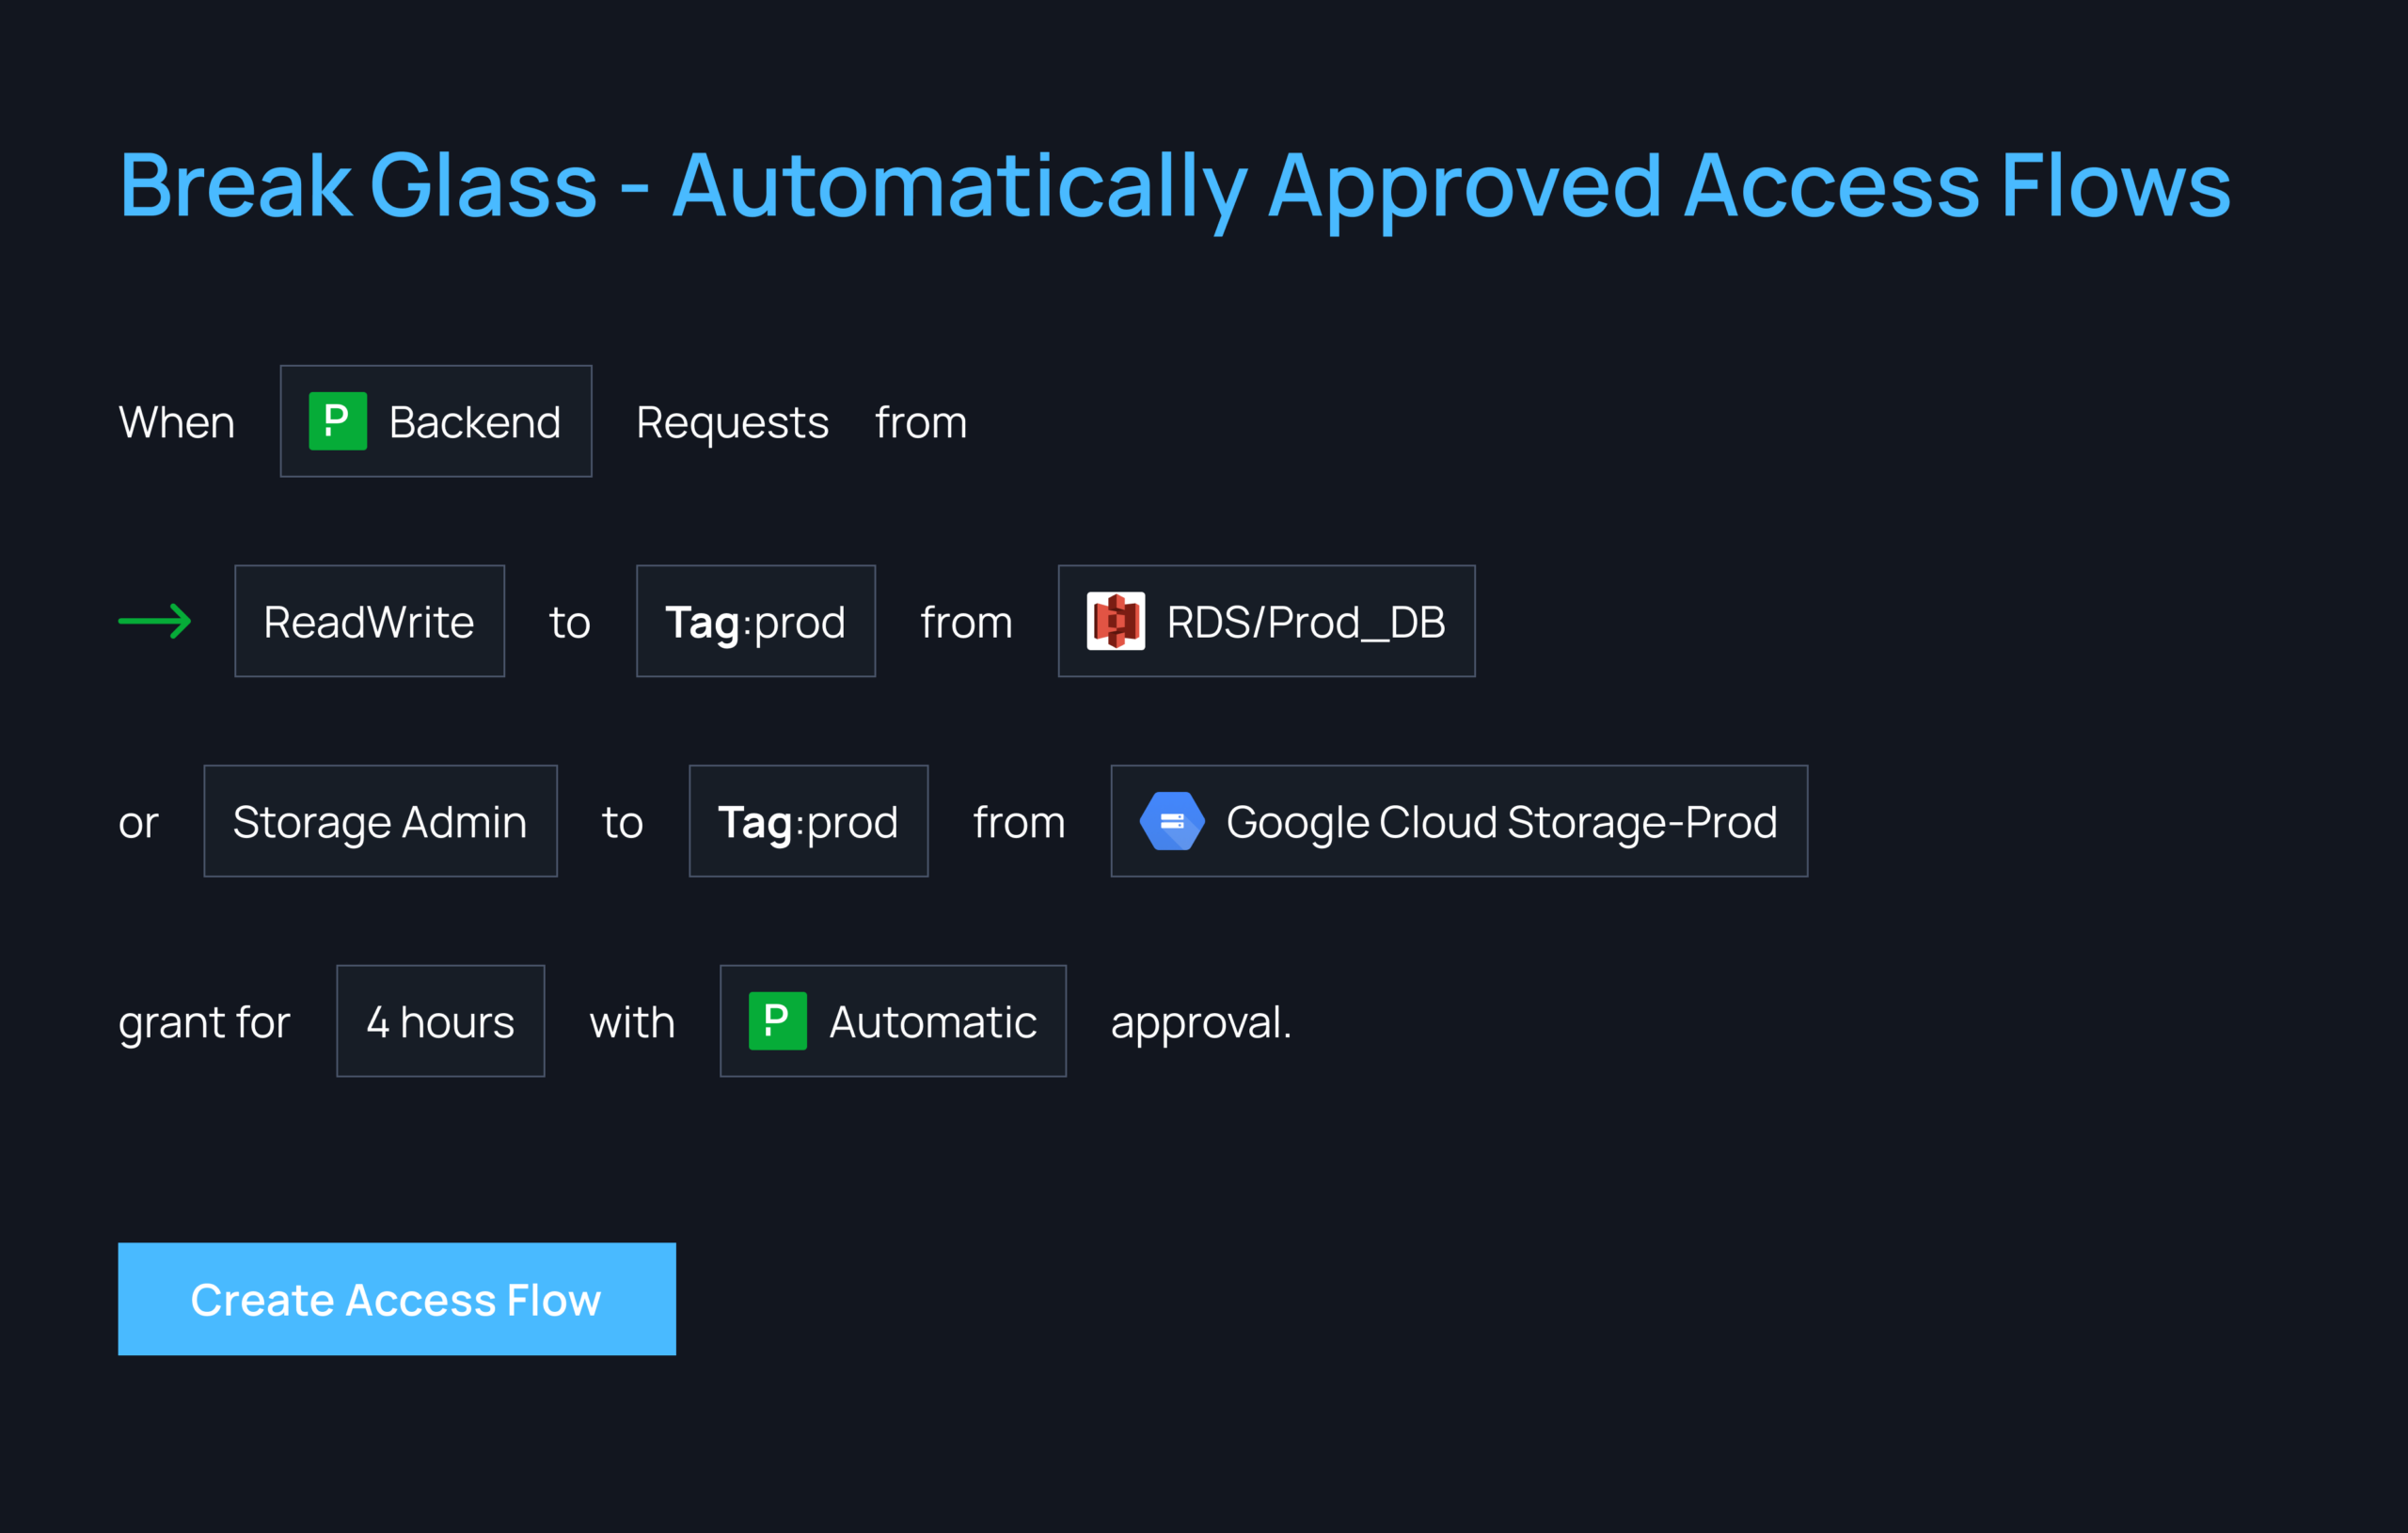 Break Glass - Automatically Approved Access Flows